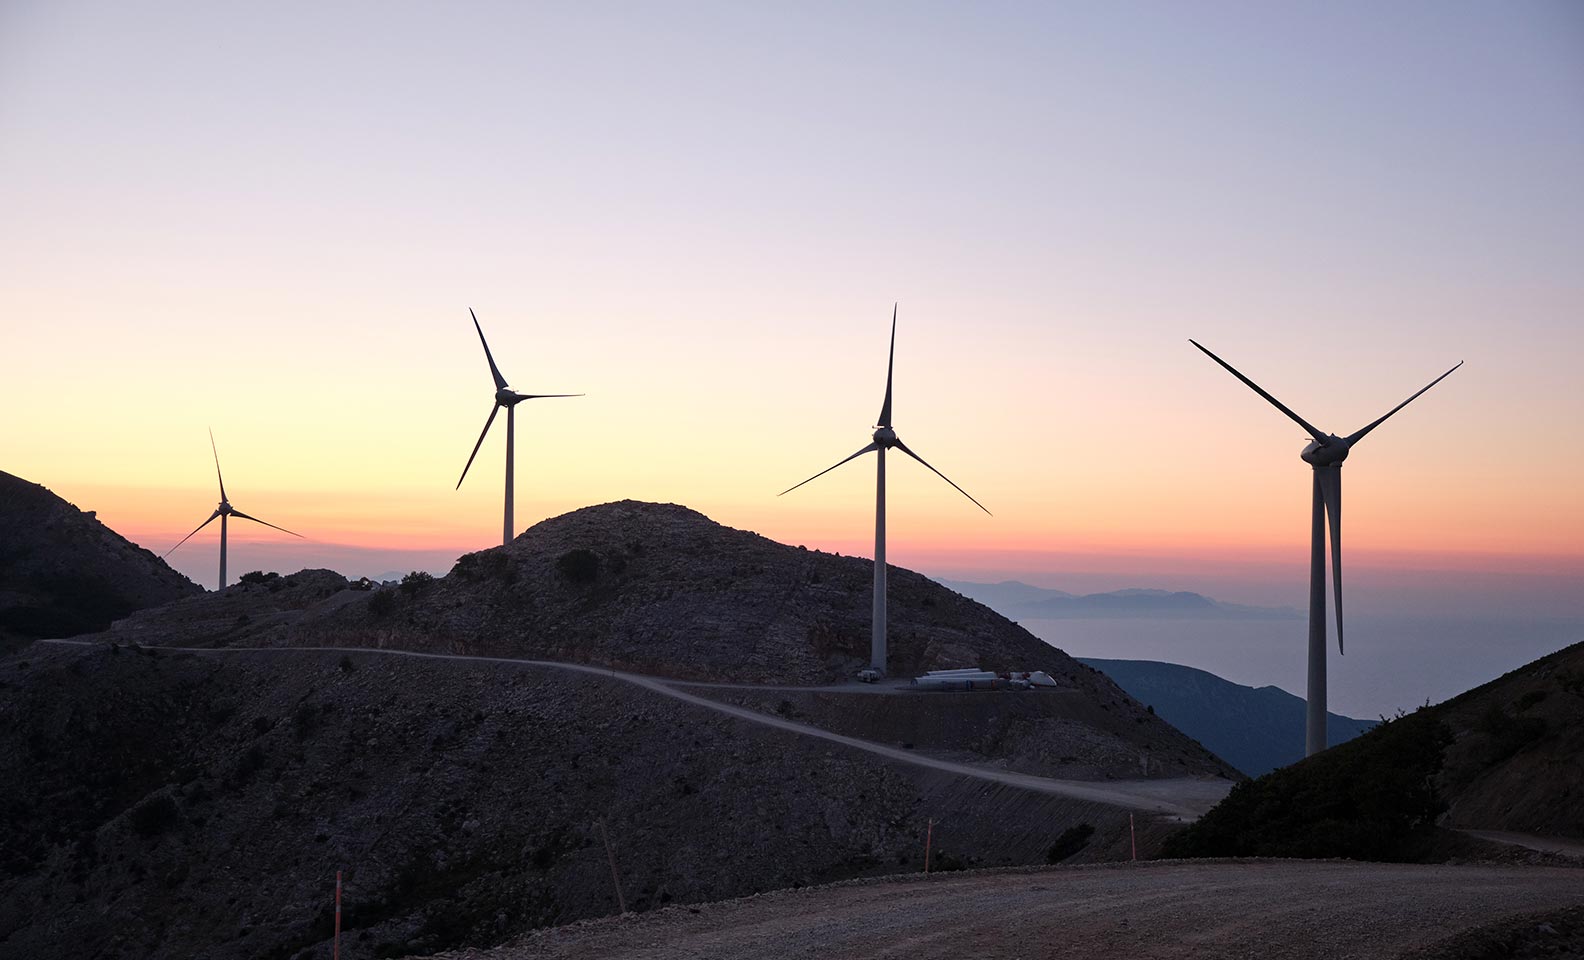 Series of wind turbines in the mountains at sunset